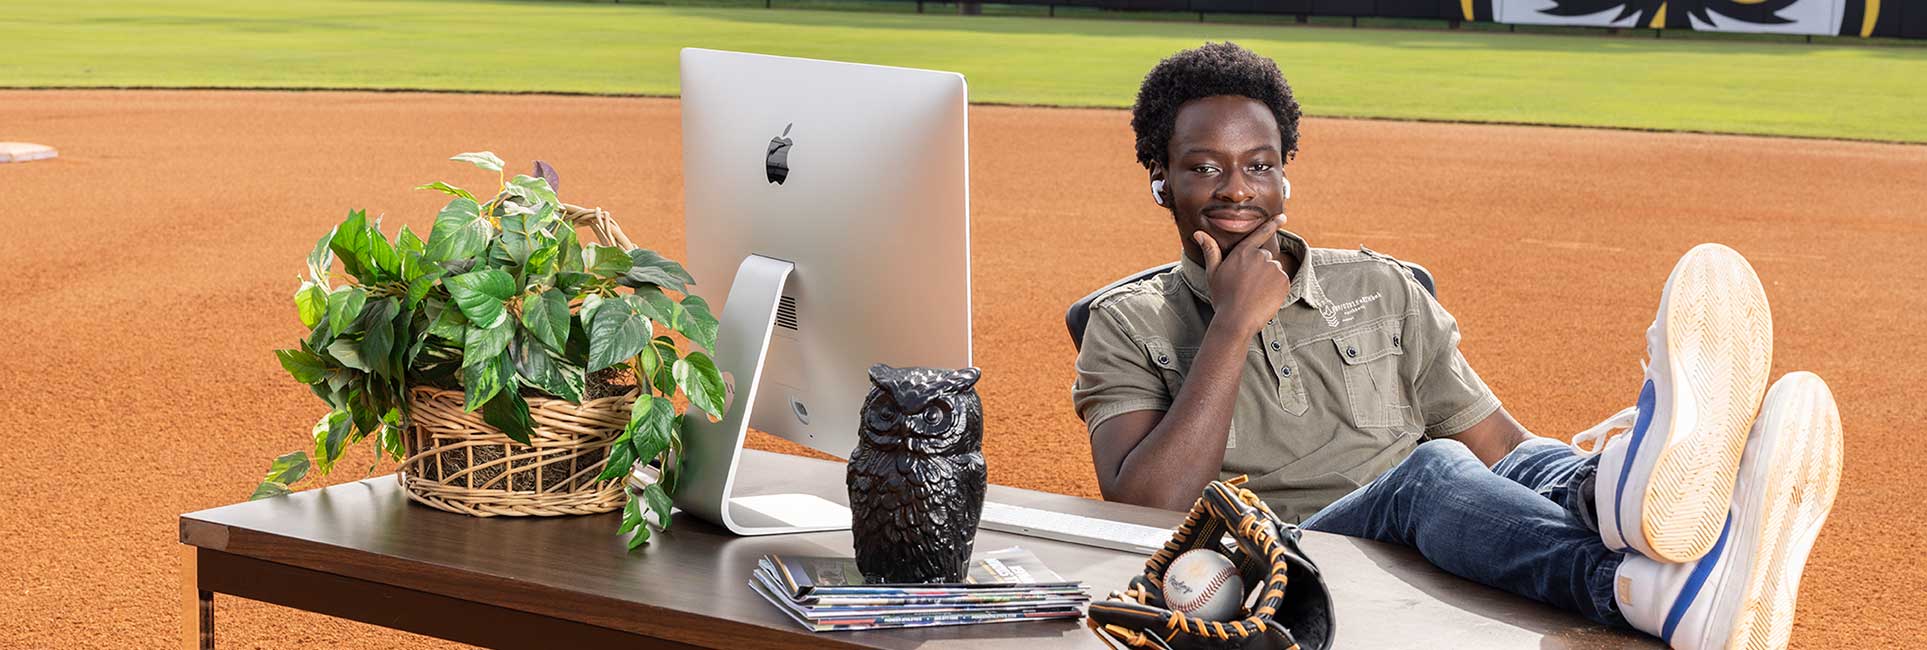 photo of ccse student sitting with his legs up at a desk in the middle of a baseball field